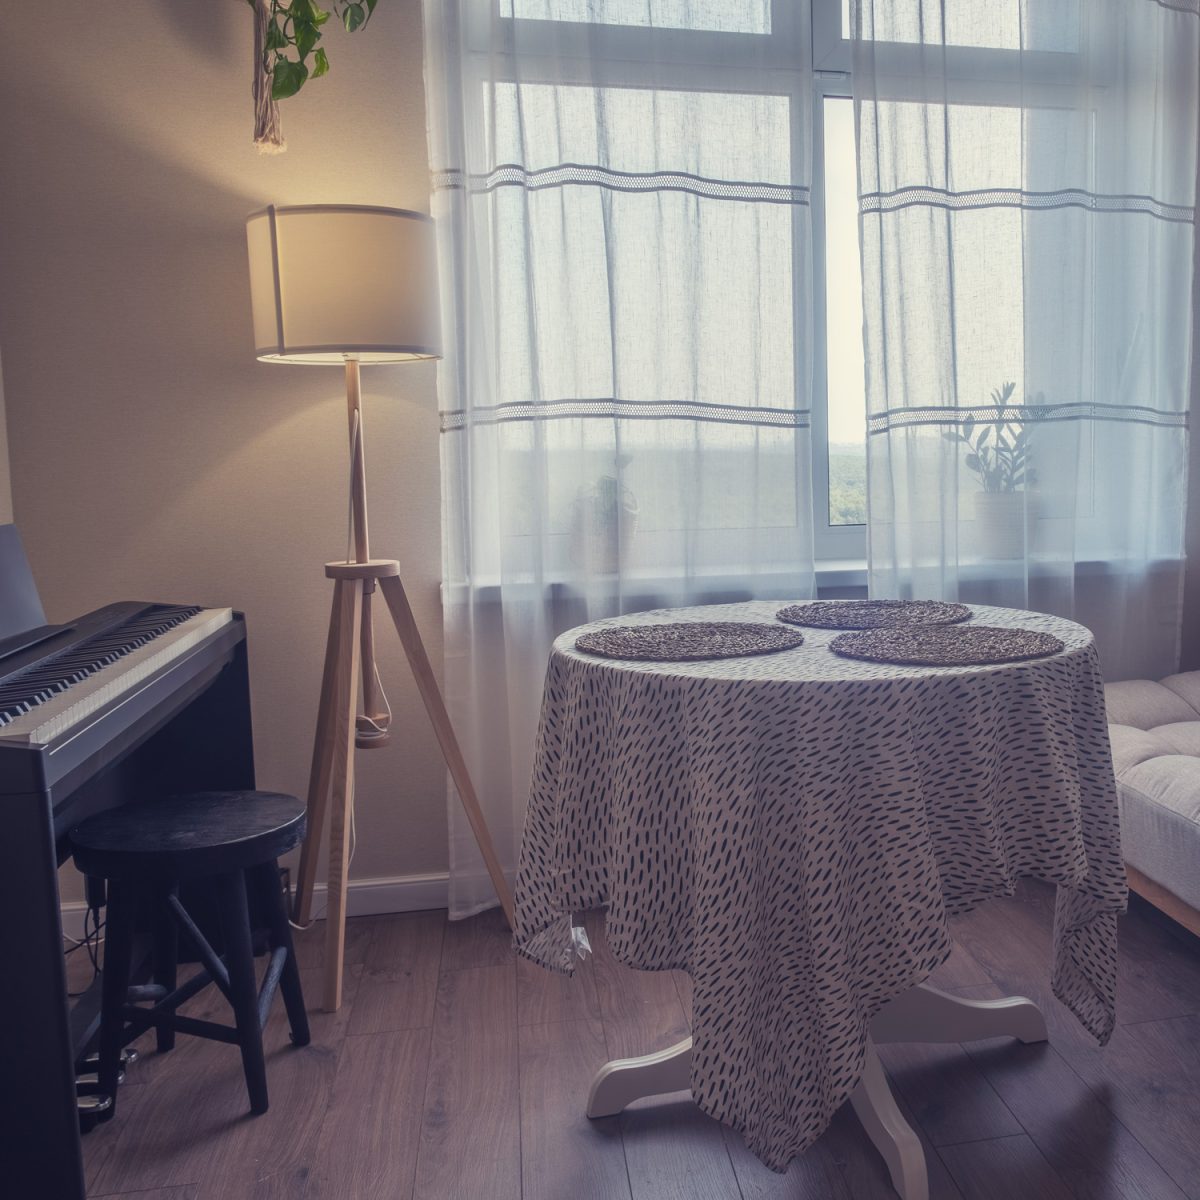 Room interior with table, couch and synthesizer. Window with a floor lamp in a living room with a musical instrument

